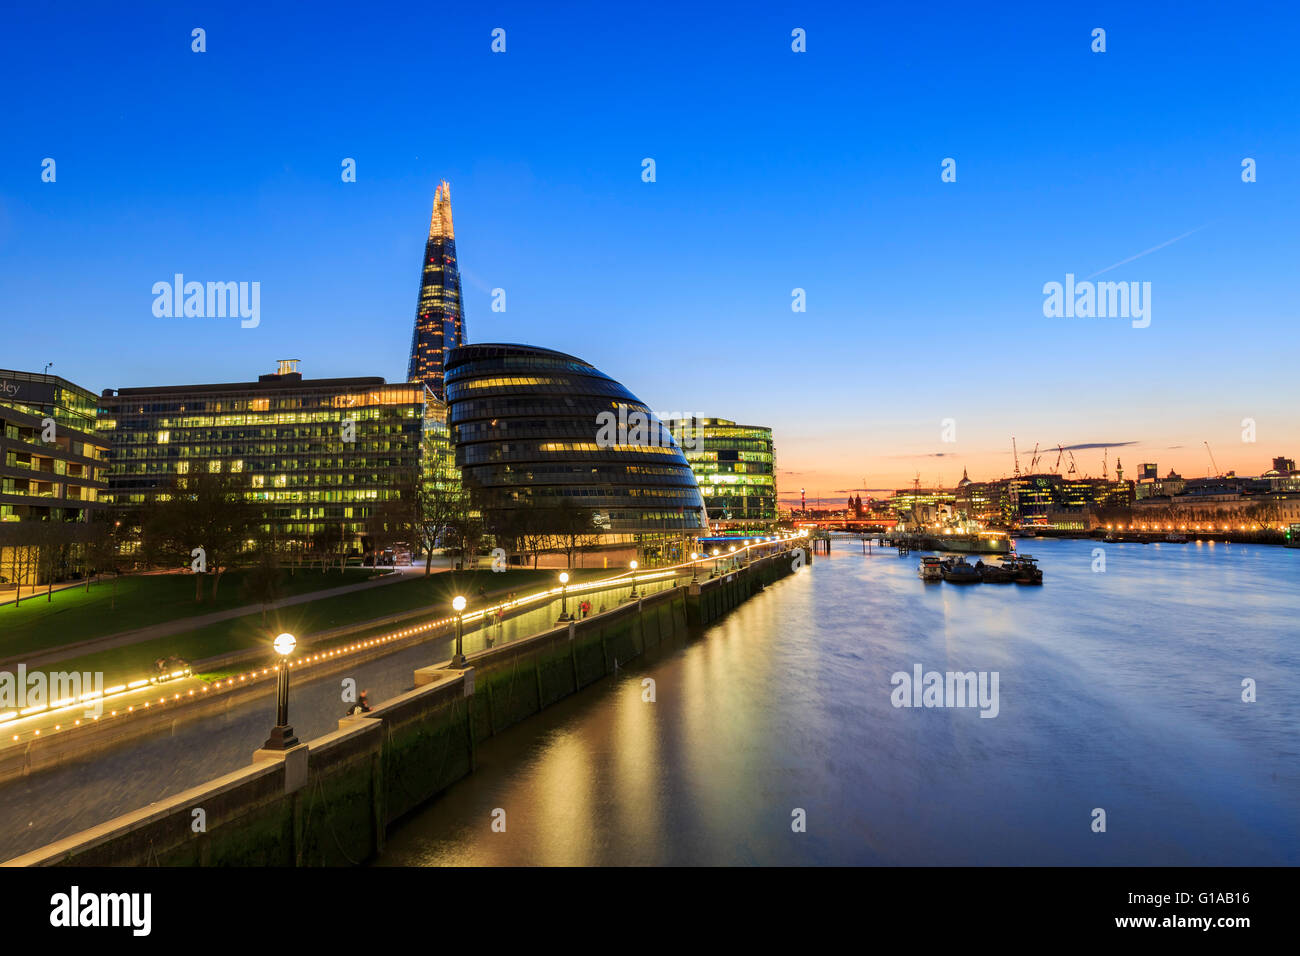 Some nightscape around the Thames River at London, United Kingdom Stock Photo